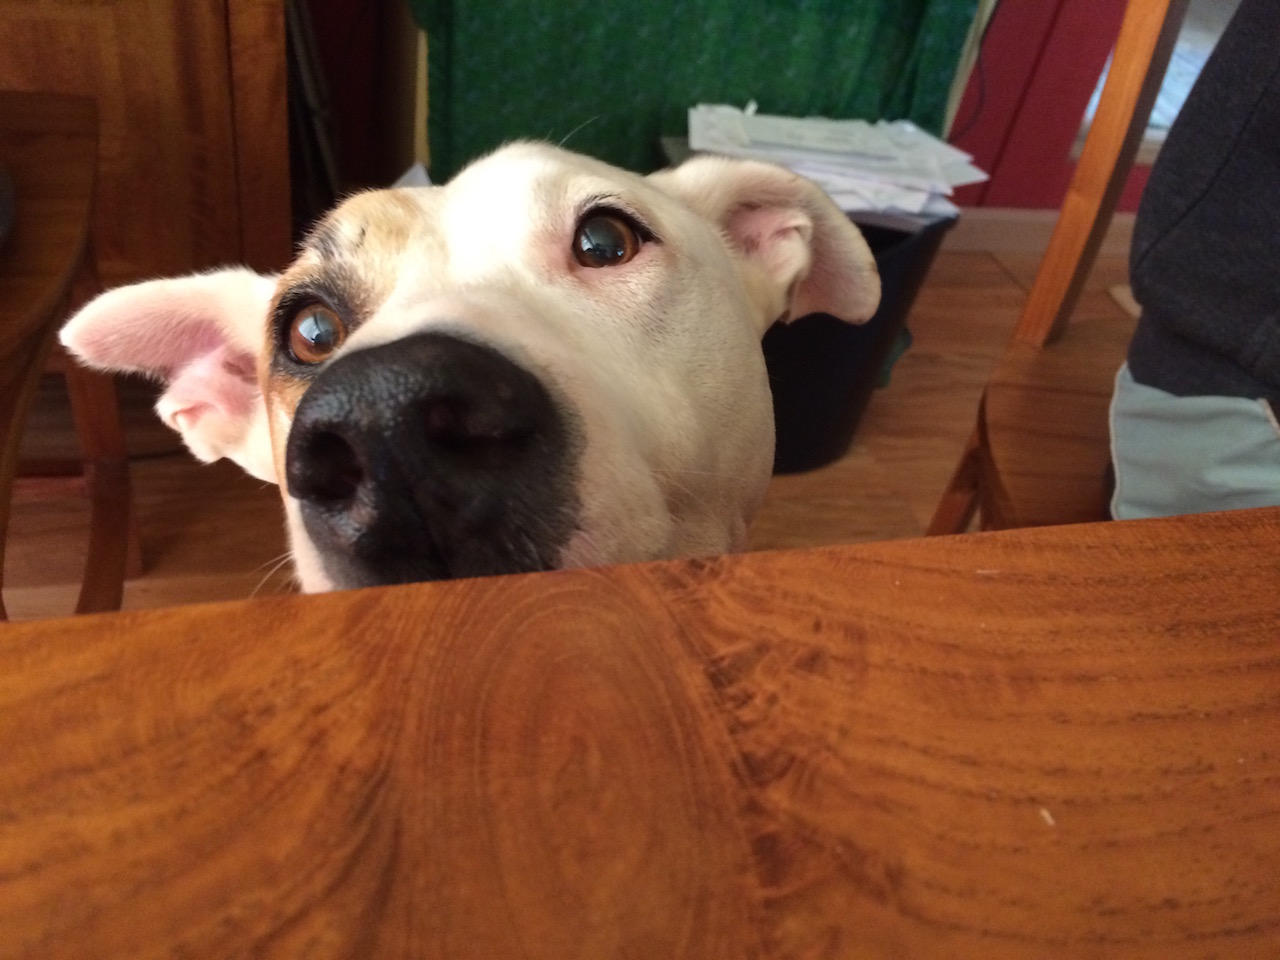 Fred the dog's nose at the dining table by Judy K. Walker